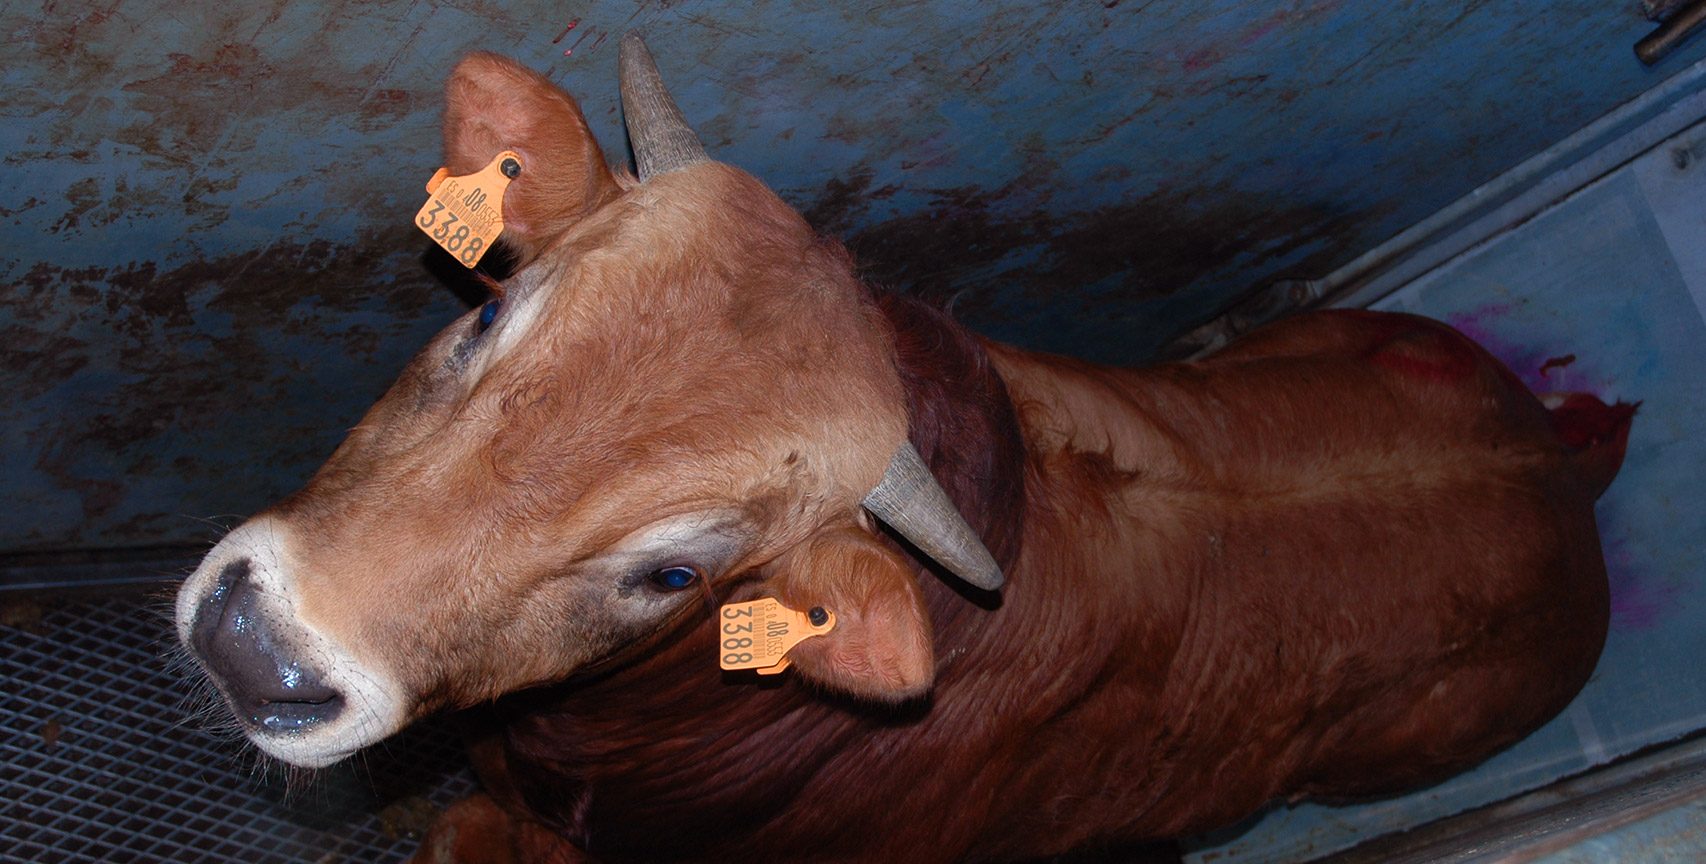 Cow in a stunning box in a Spanish slaughterhouse